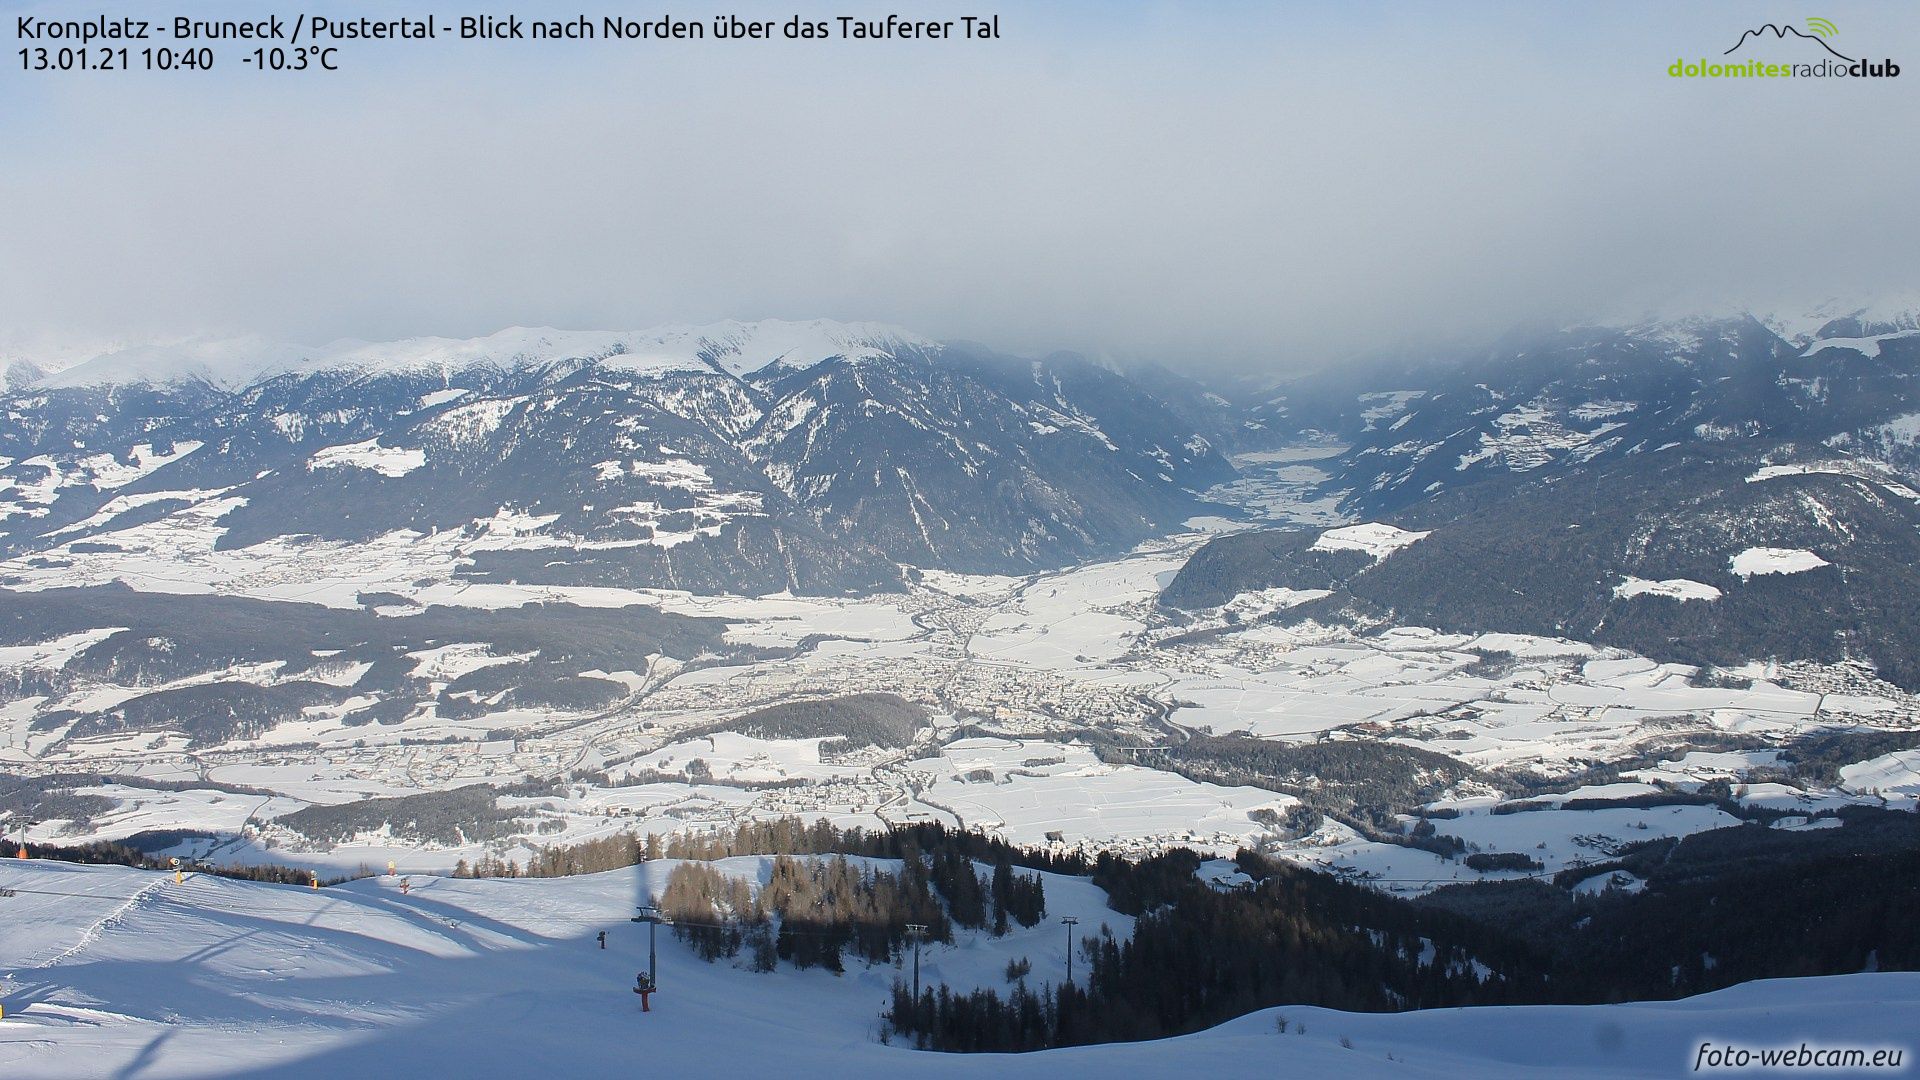 From the Kronplatz in South Tyrol, the dense clouds at the main alpine ridge are visible, but further south it is mostly sunny